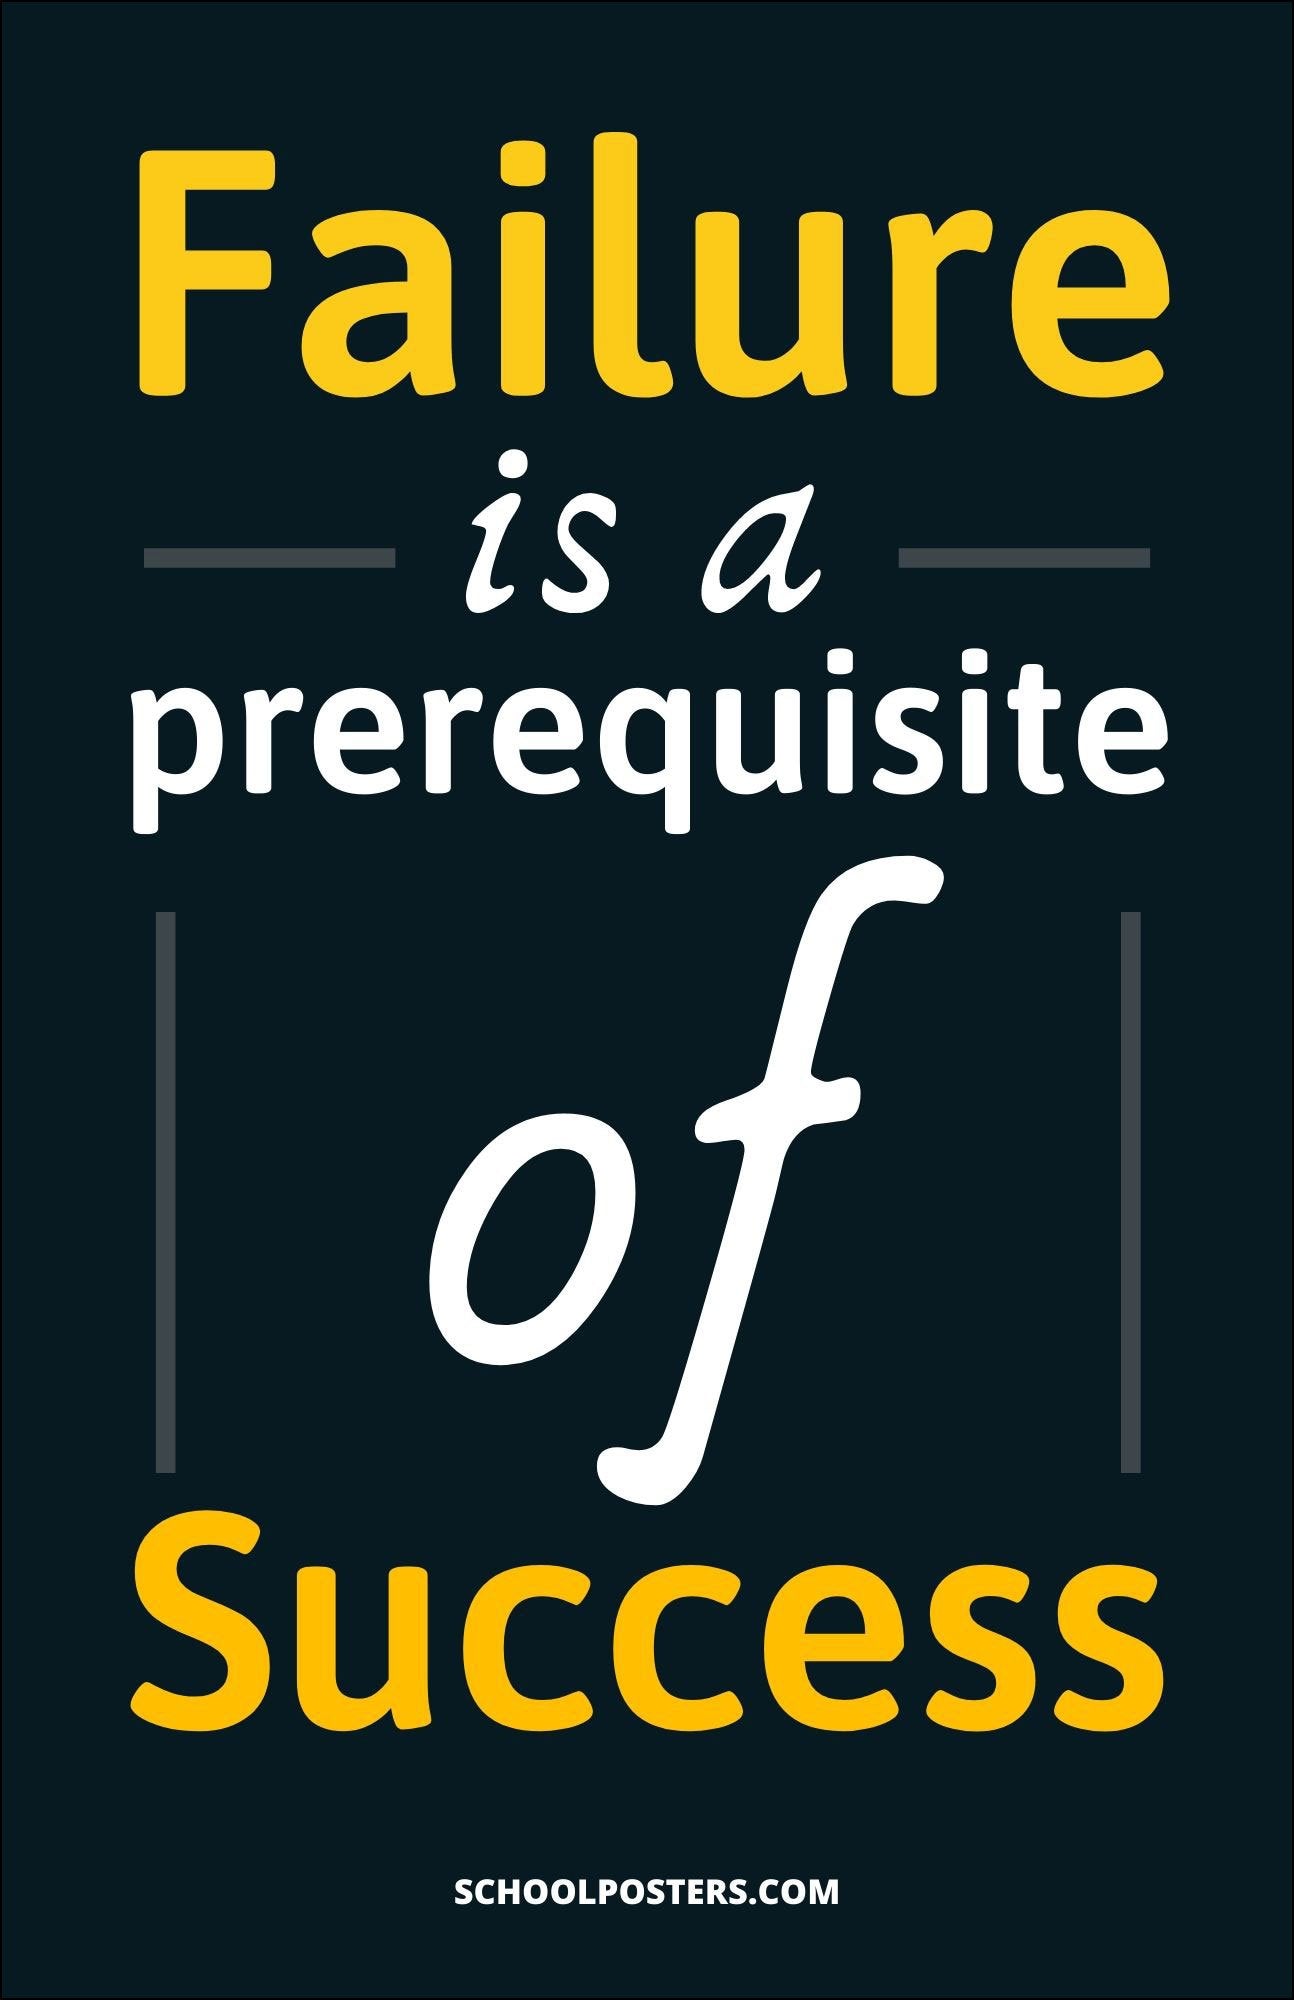 Failure is a Prerequisite of Success Poster